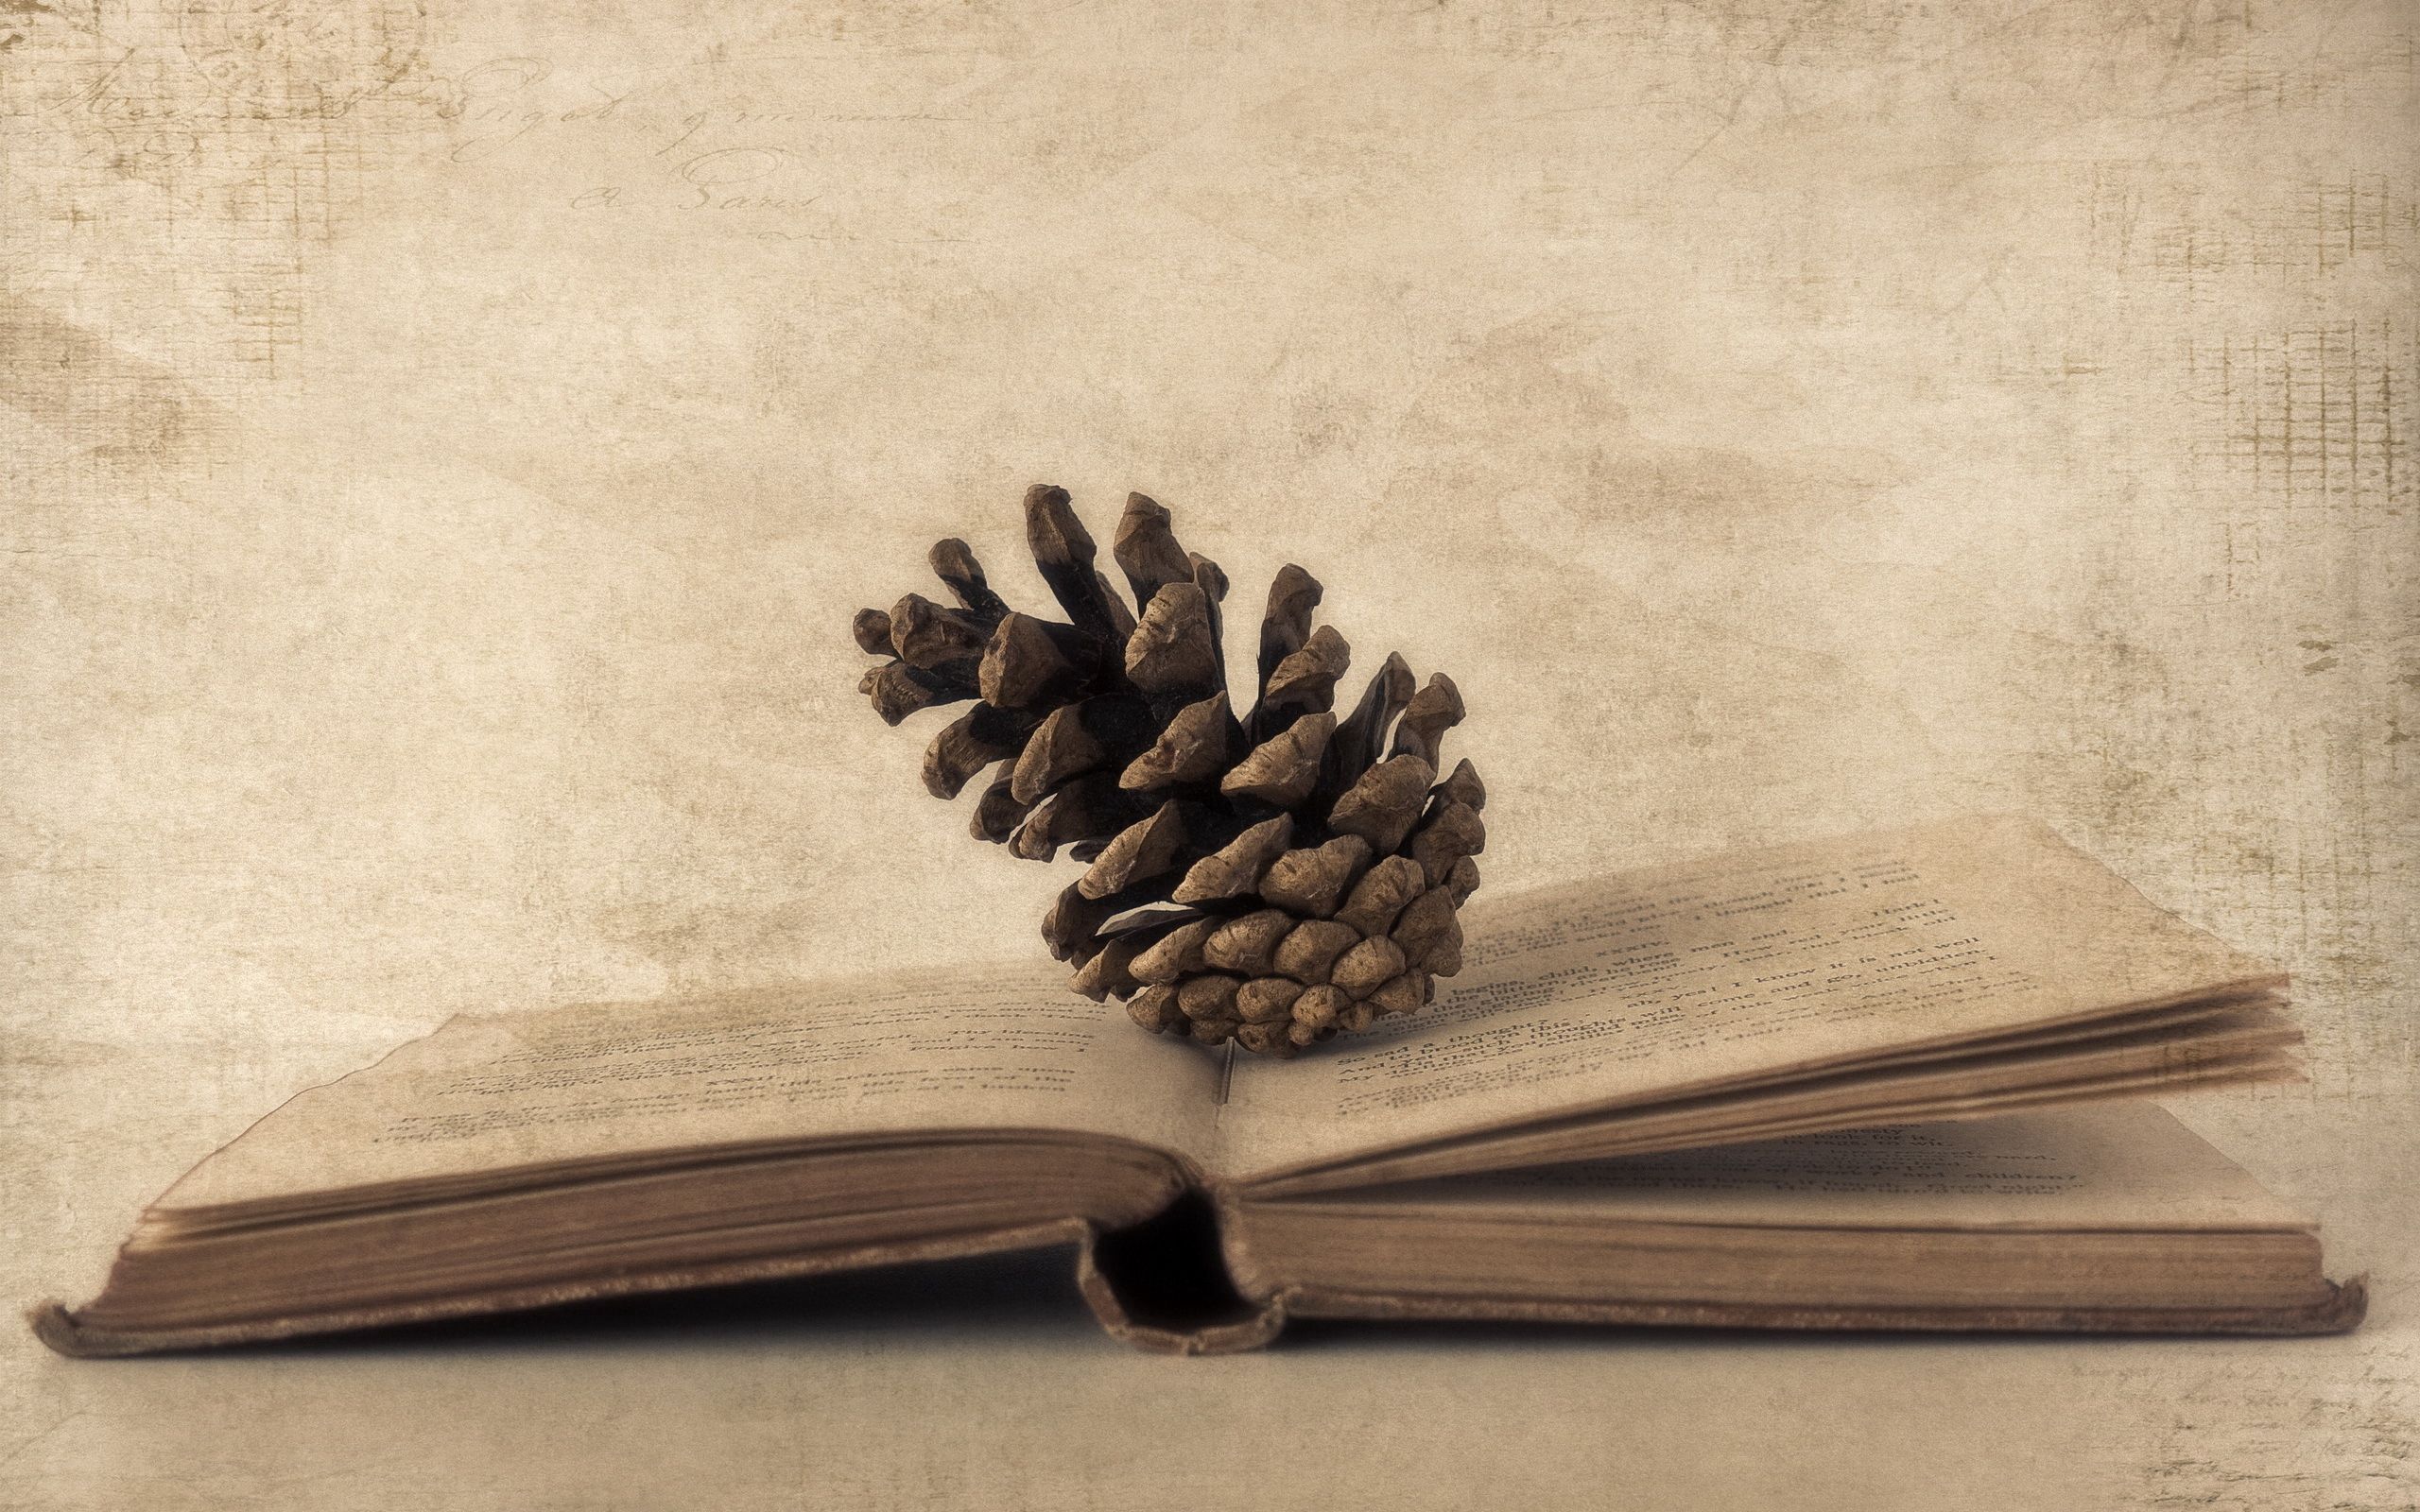 book, old photo, cones, miscellanea, miscellaneous, paper wallpapers for tablet